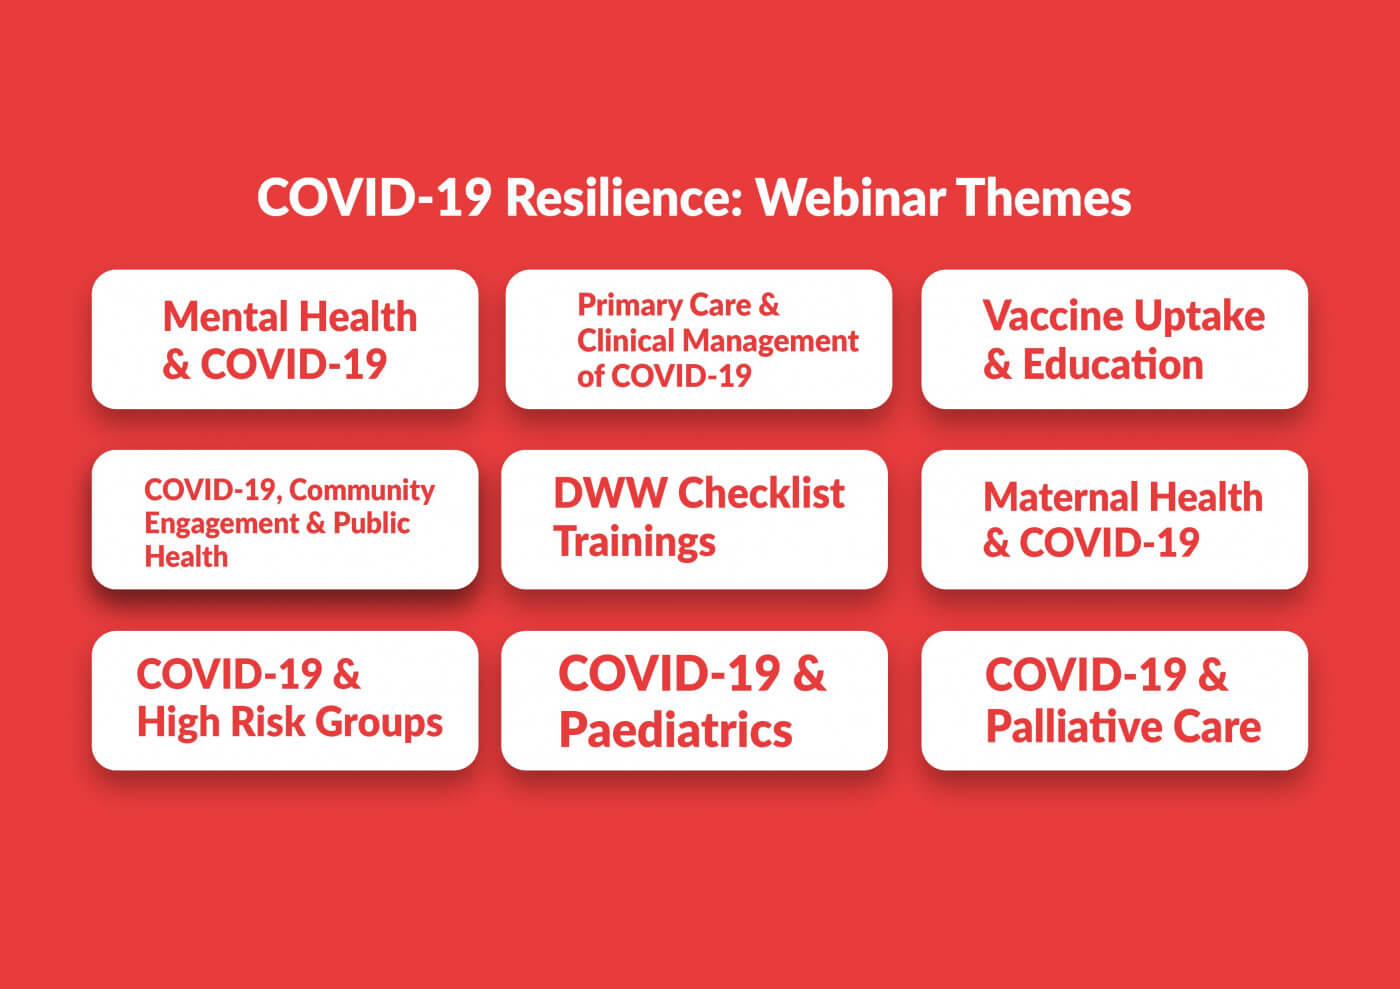 COVID-19 Resilience project webinar themes